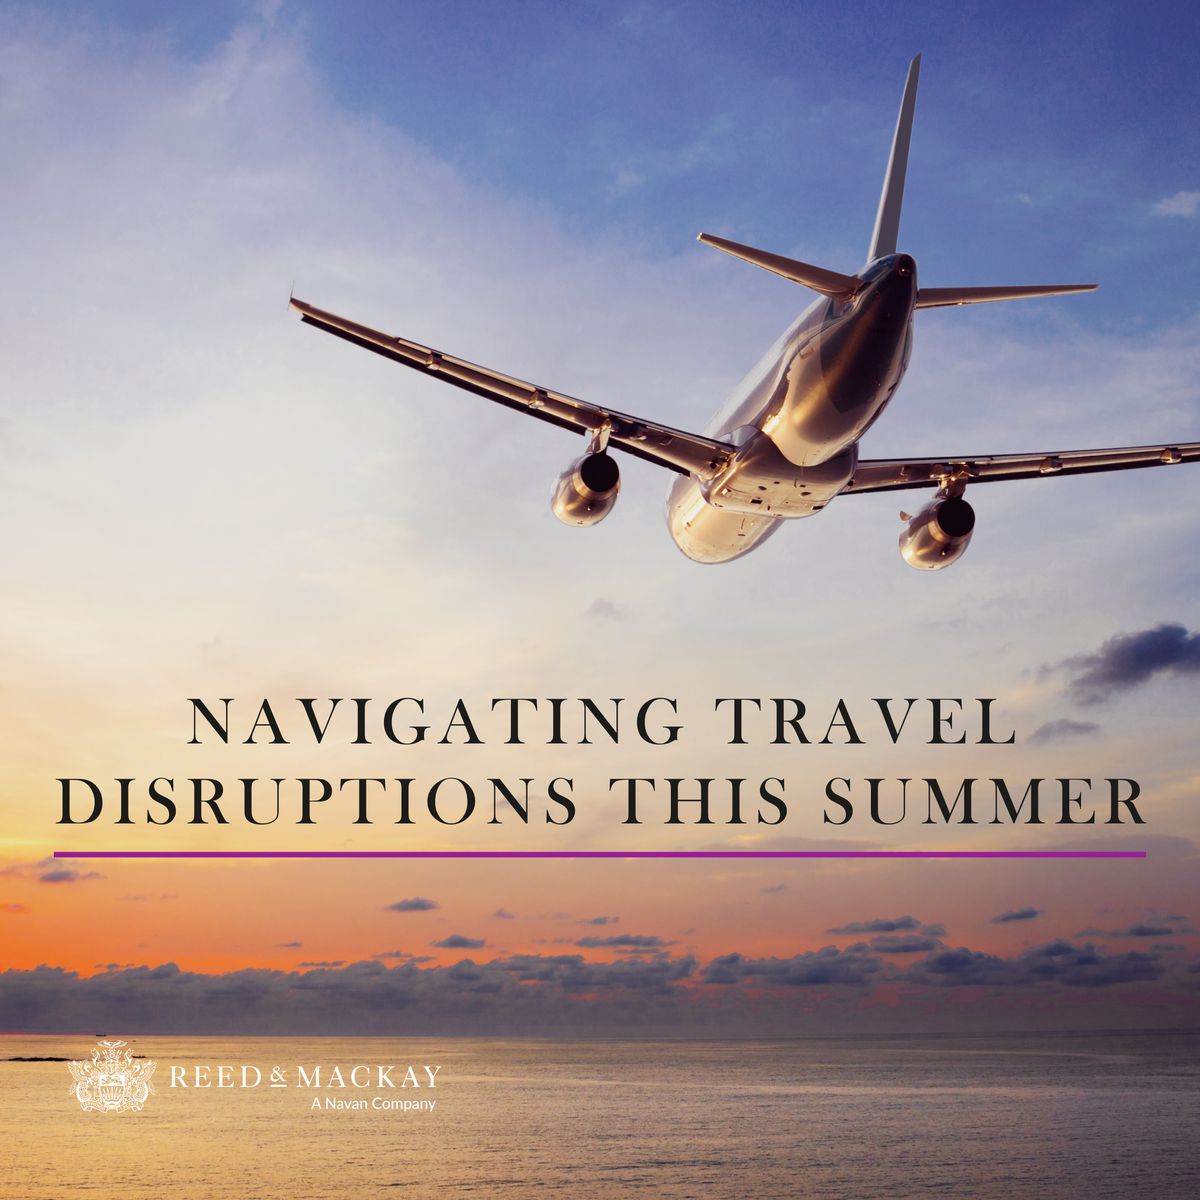 How to Navigate Travel Disruption this Summer